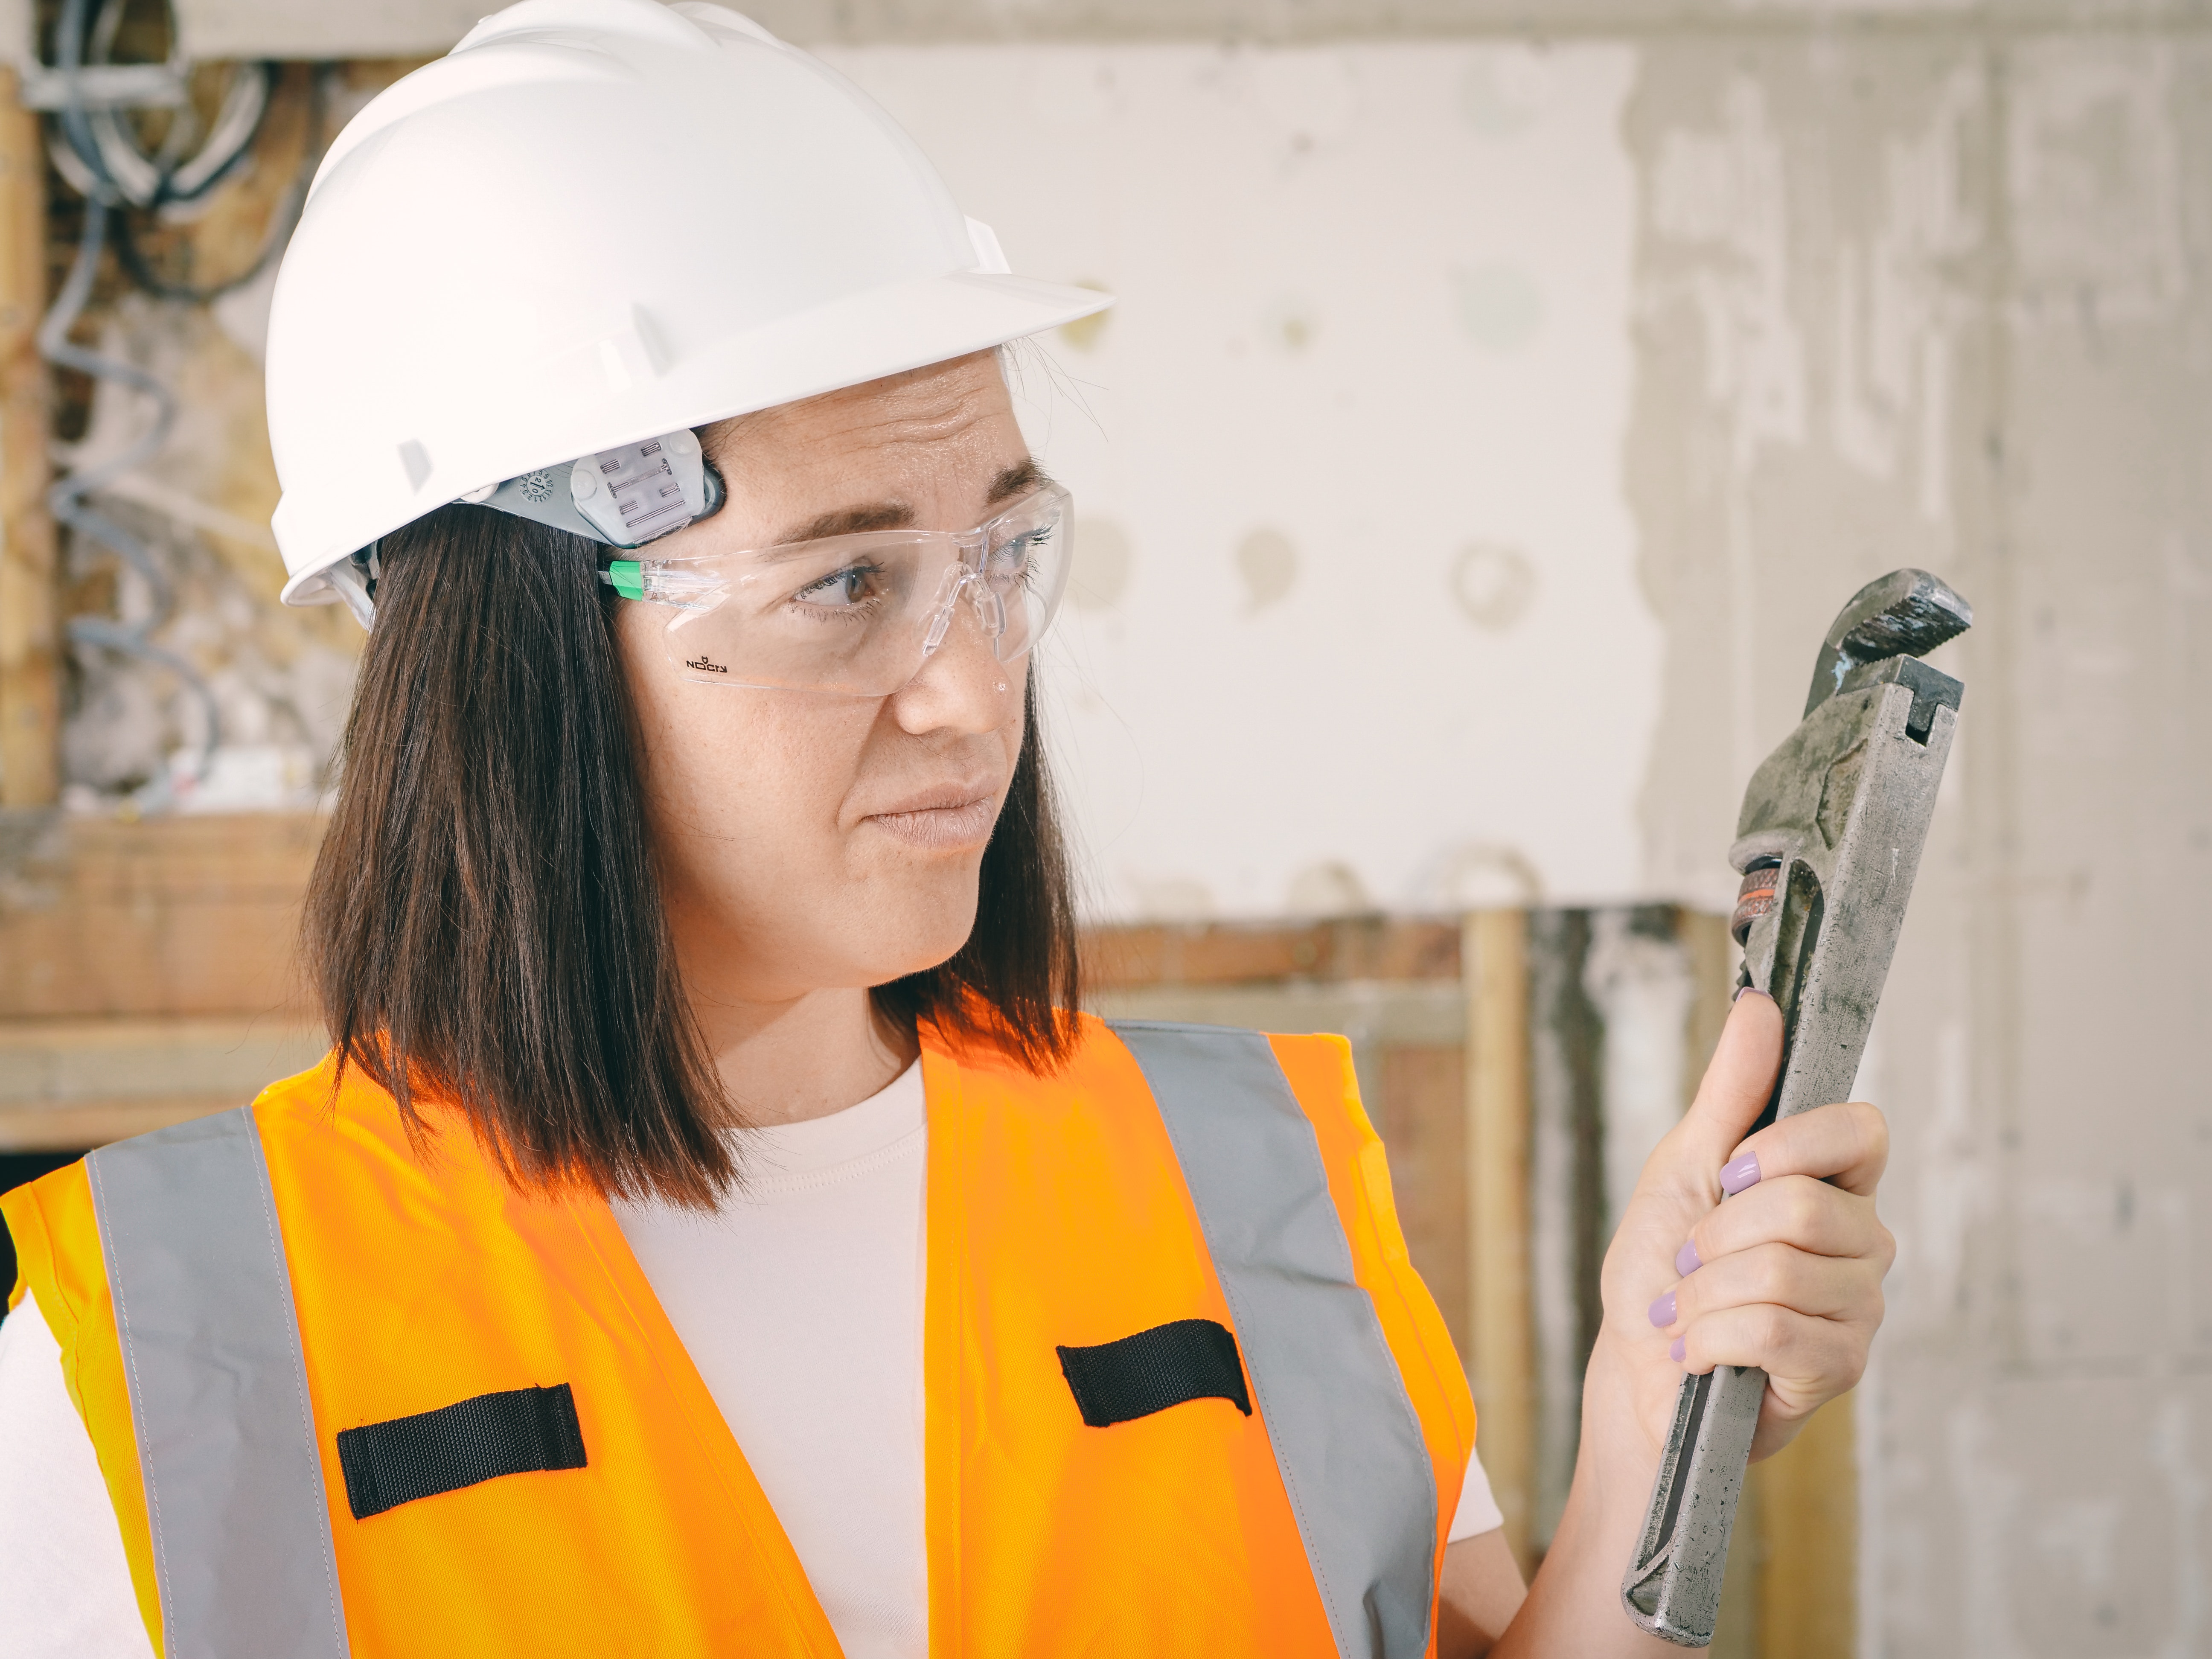 A handywoman holding a large wrench.